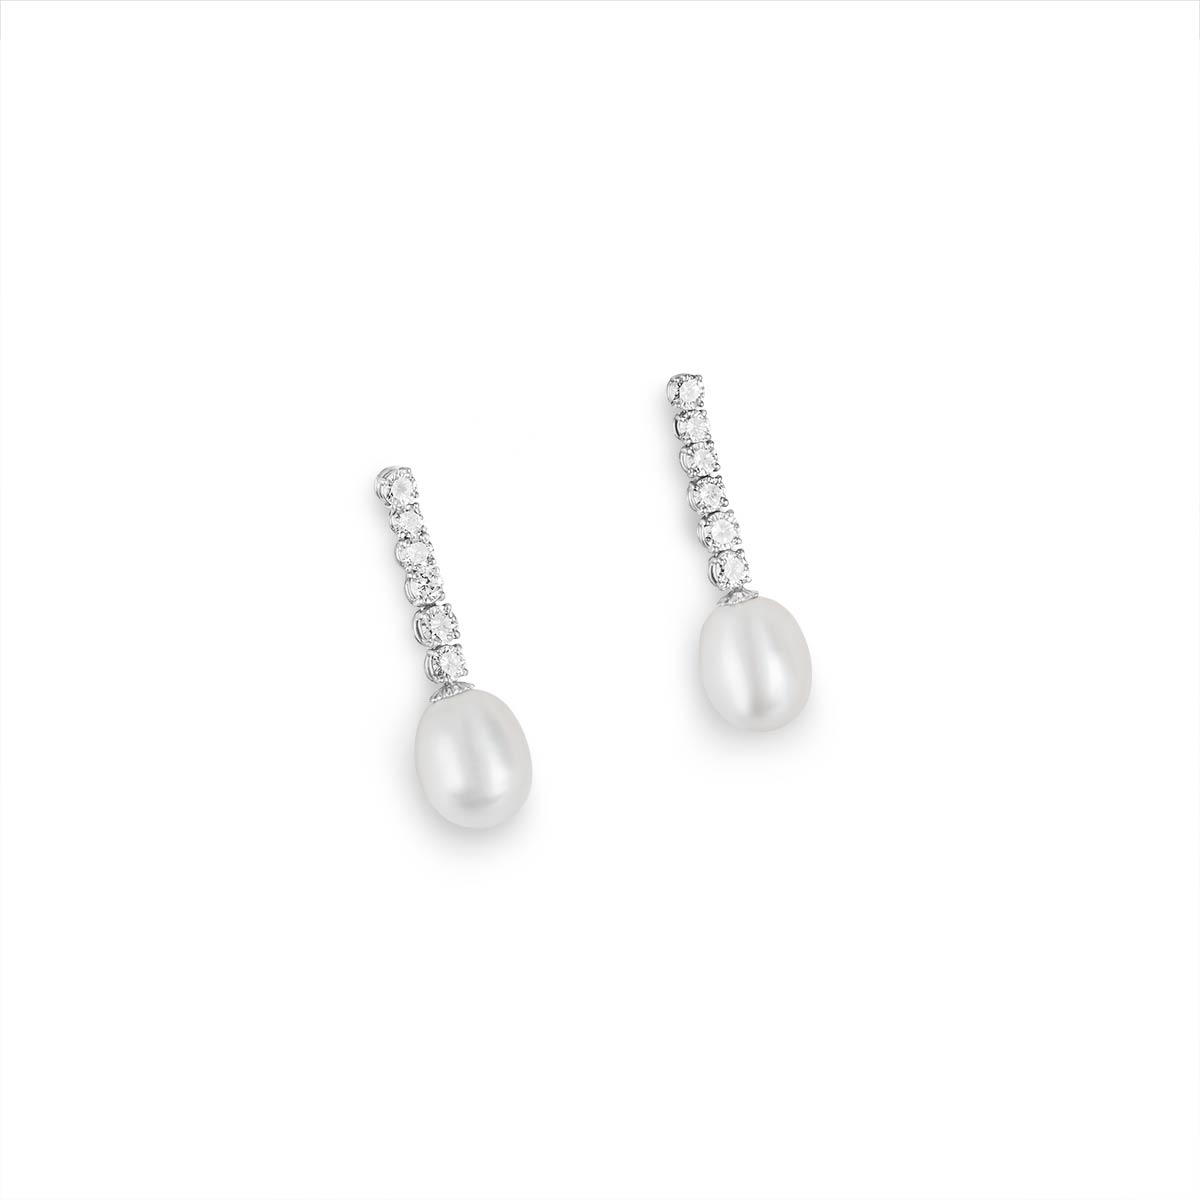 White Gold Diamond and Pearl Drop Earrings